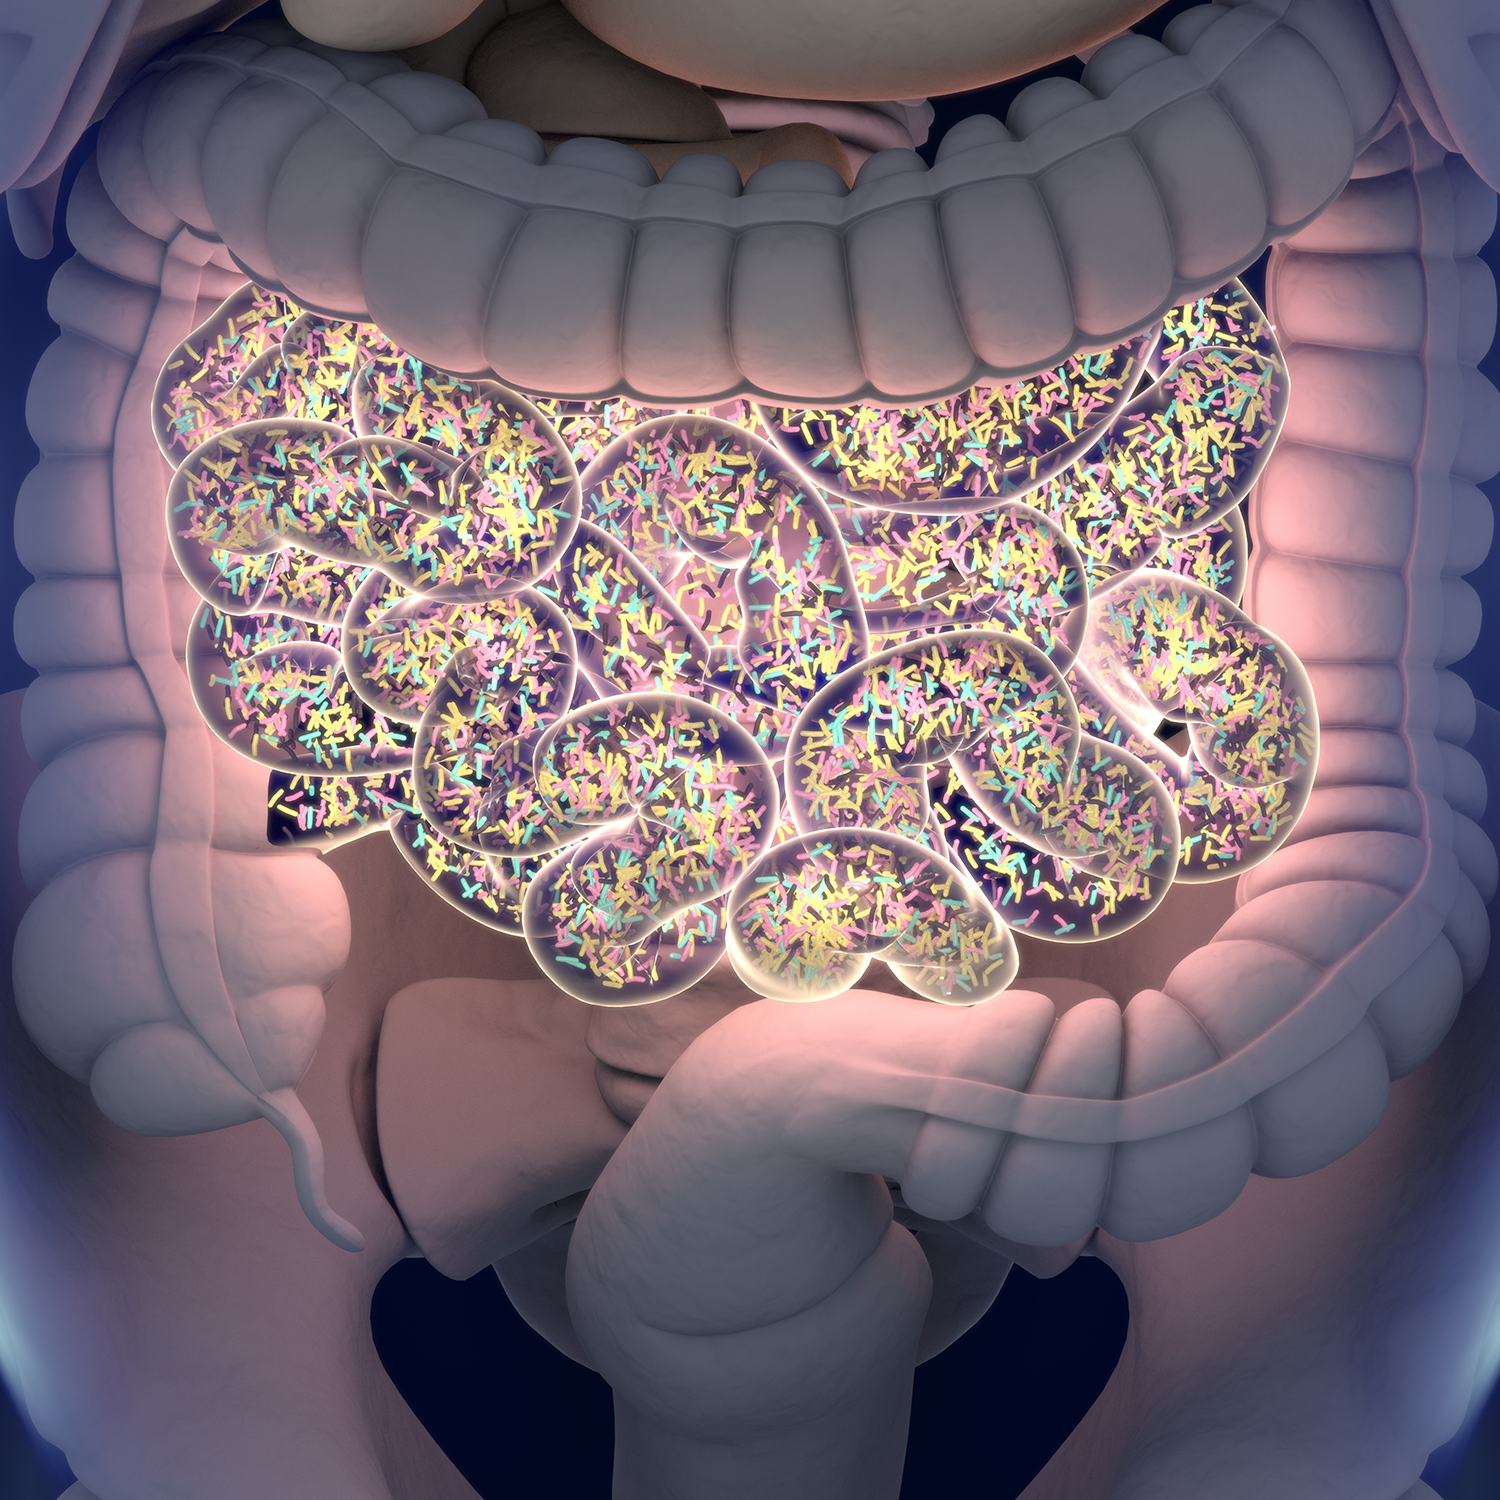 Gut Microbiome, Diet and Health